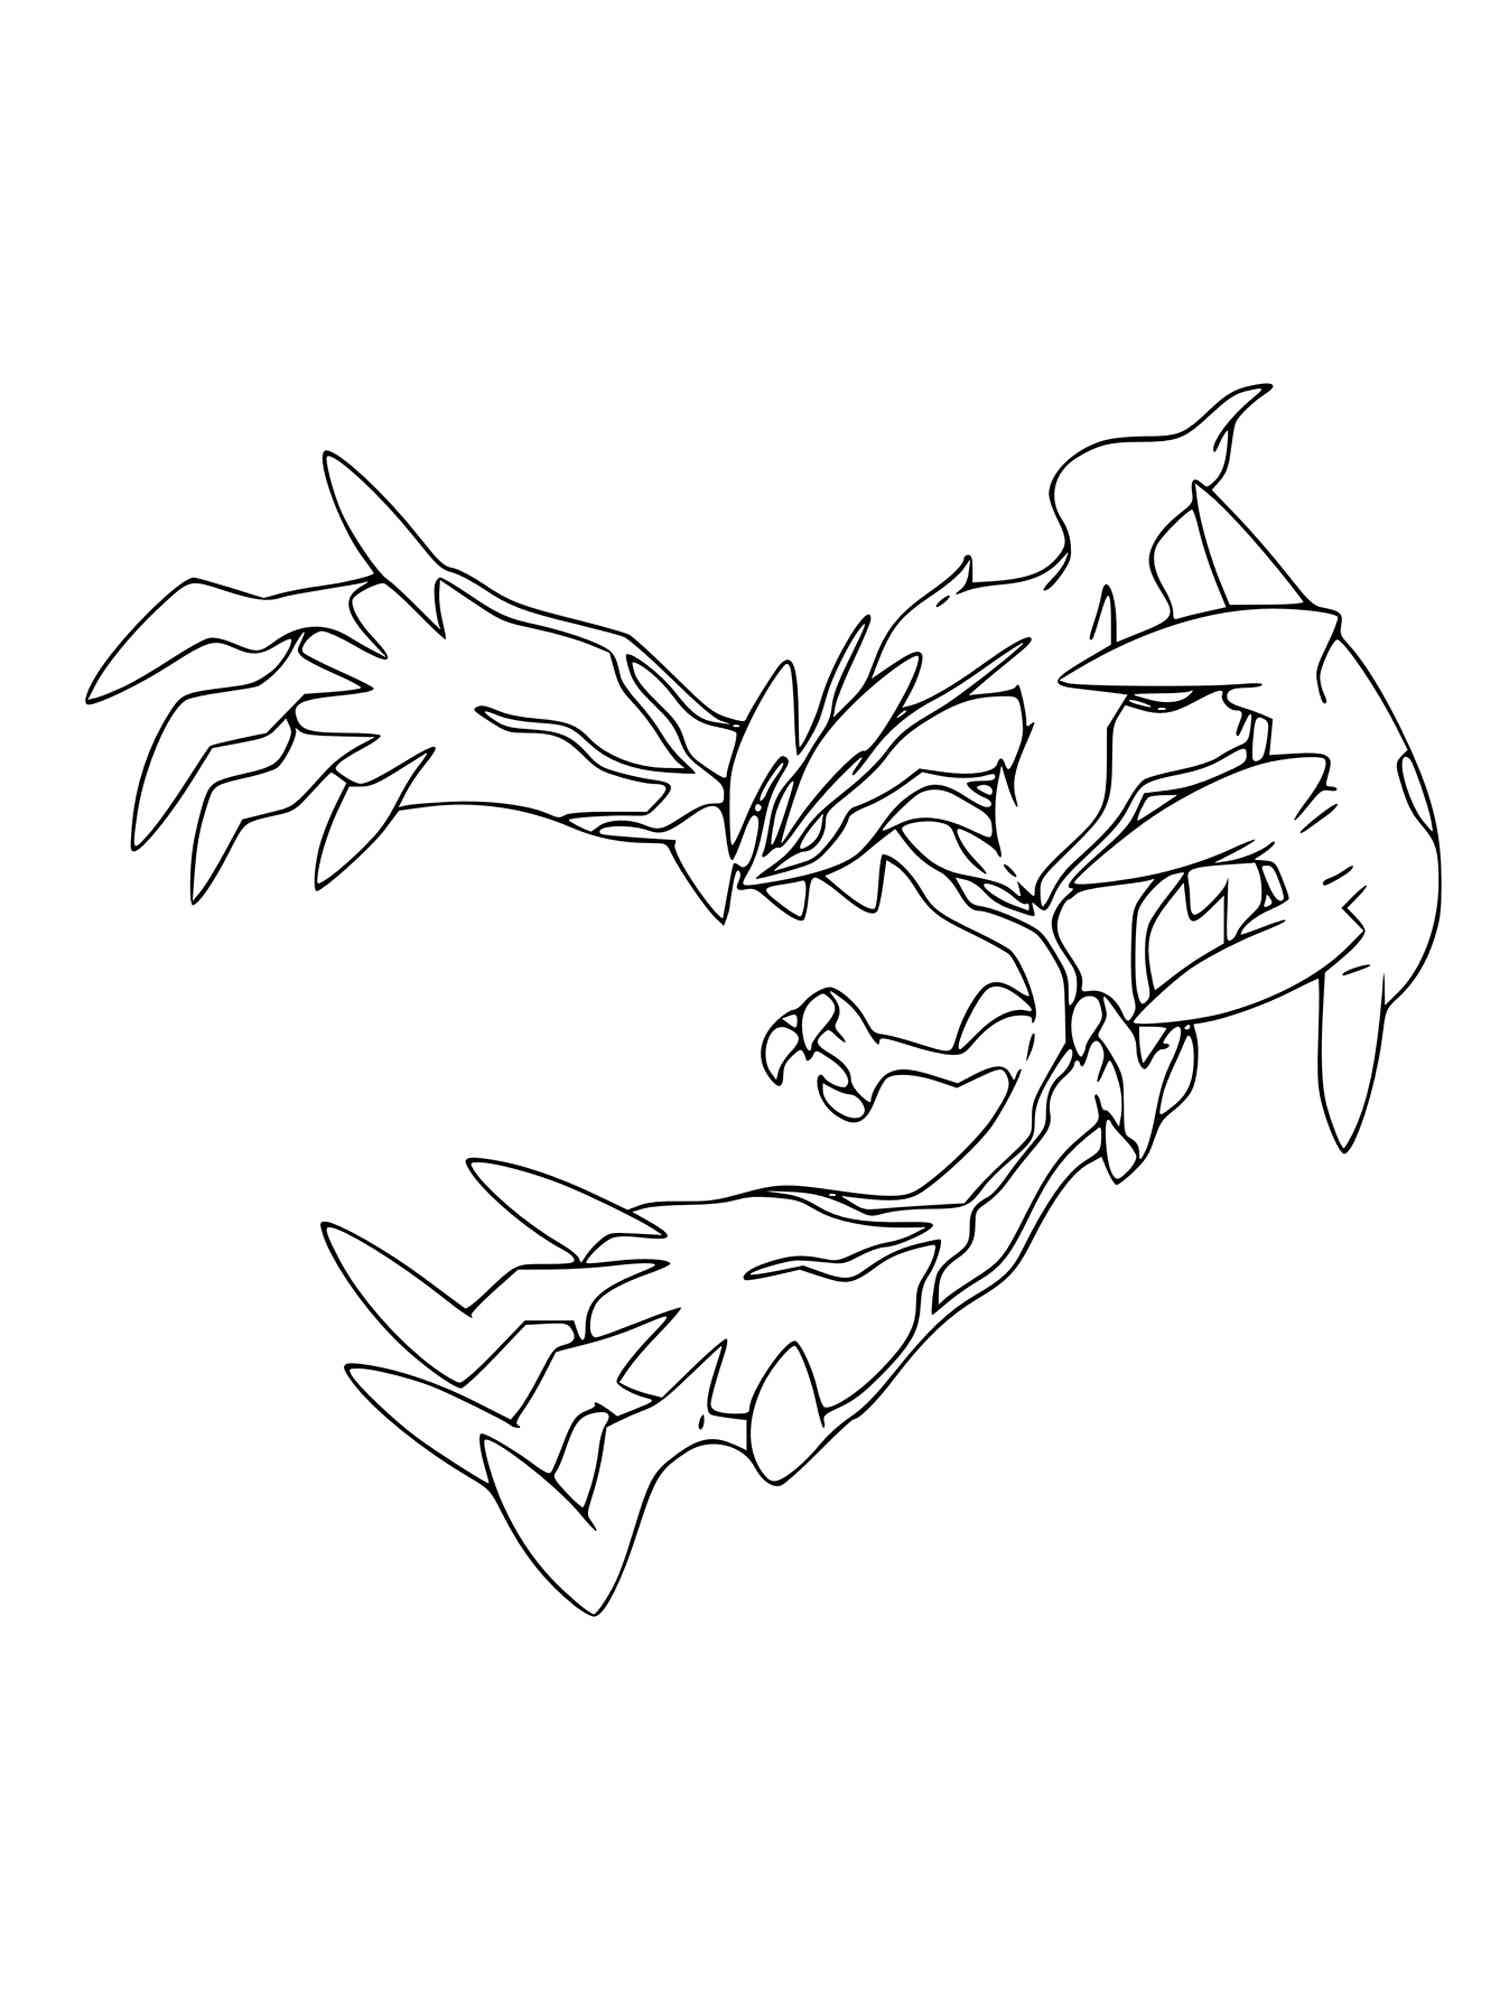 Yveltal Pokemon Coloring Pages